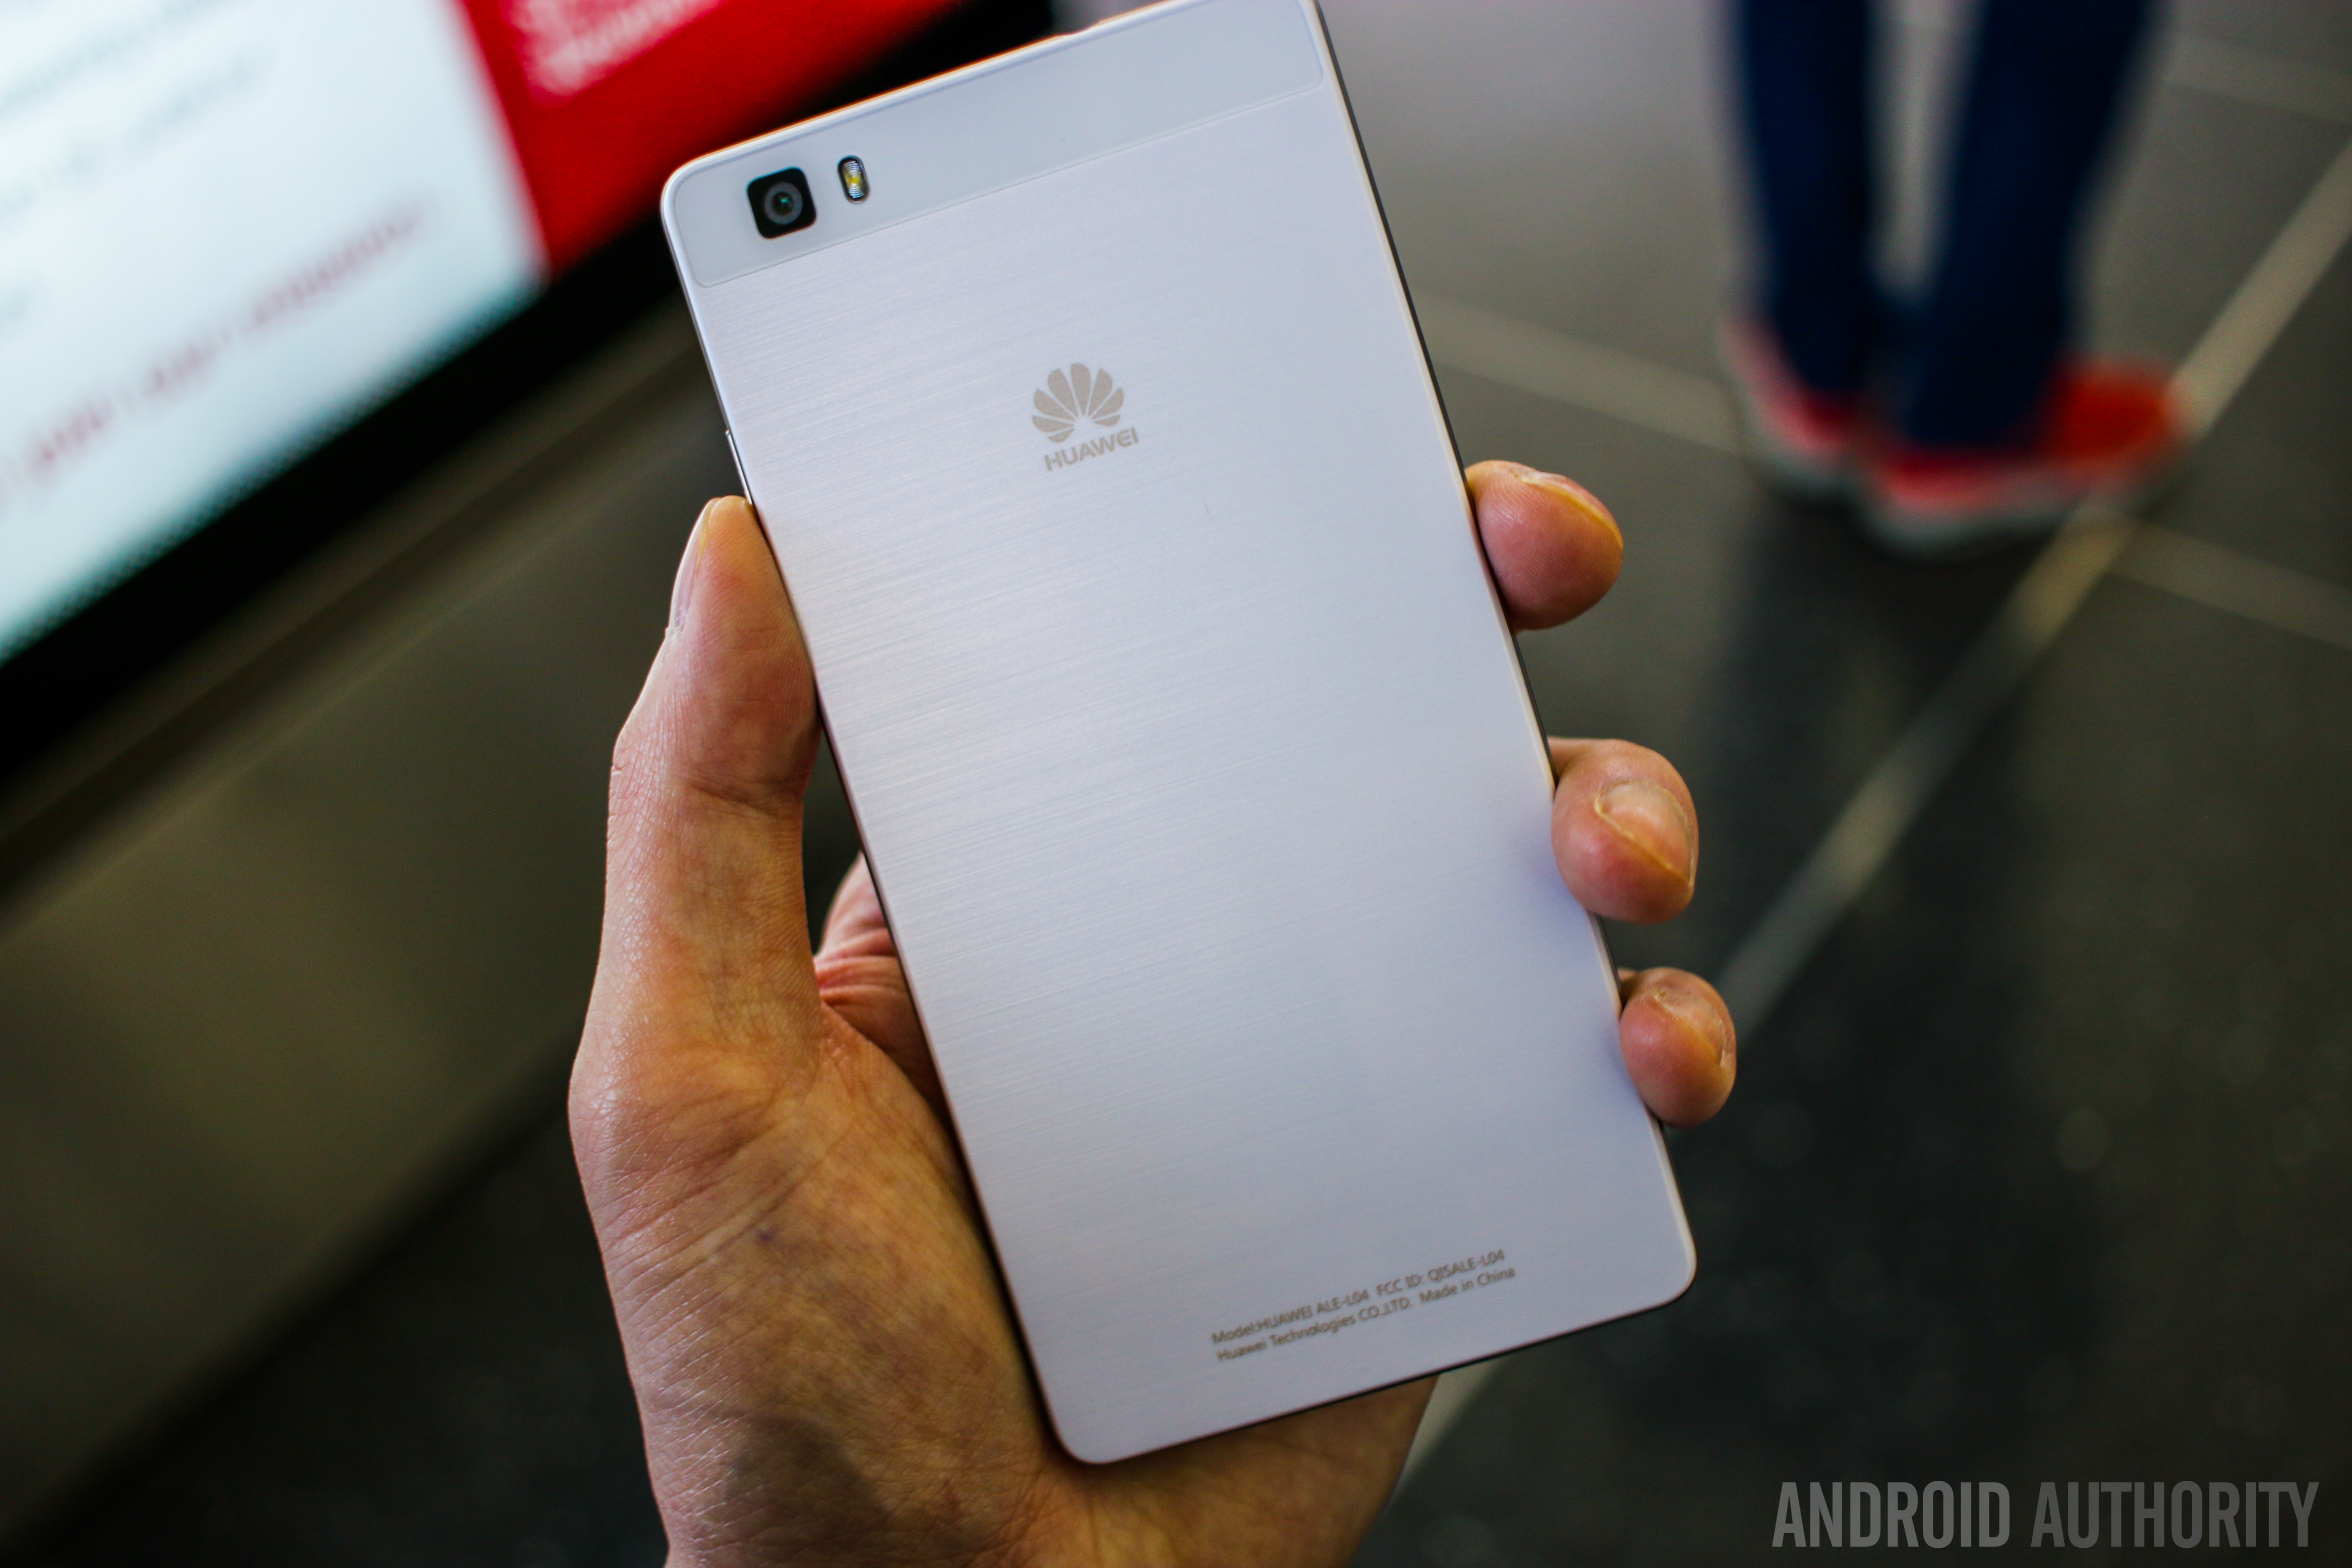 Overeenstemming Stoutmoedig Bedrog HUAWEI P8 Lite Hands on and First Impressions